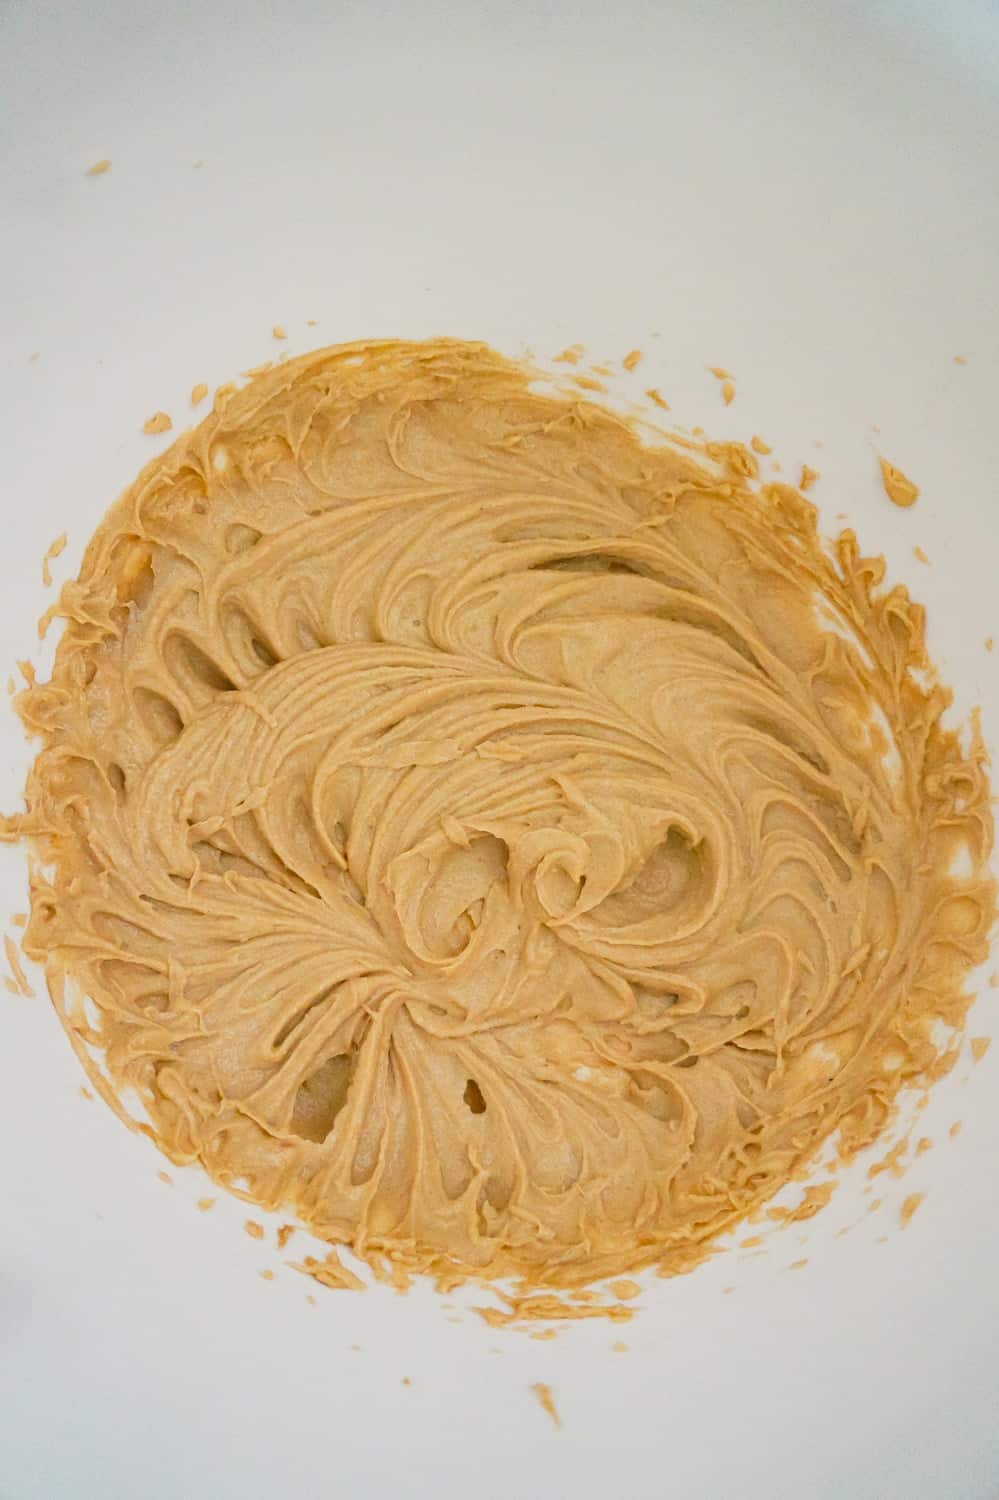 creamy peanut butter and butter mixture in a mixing bowl